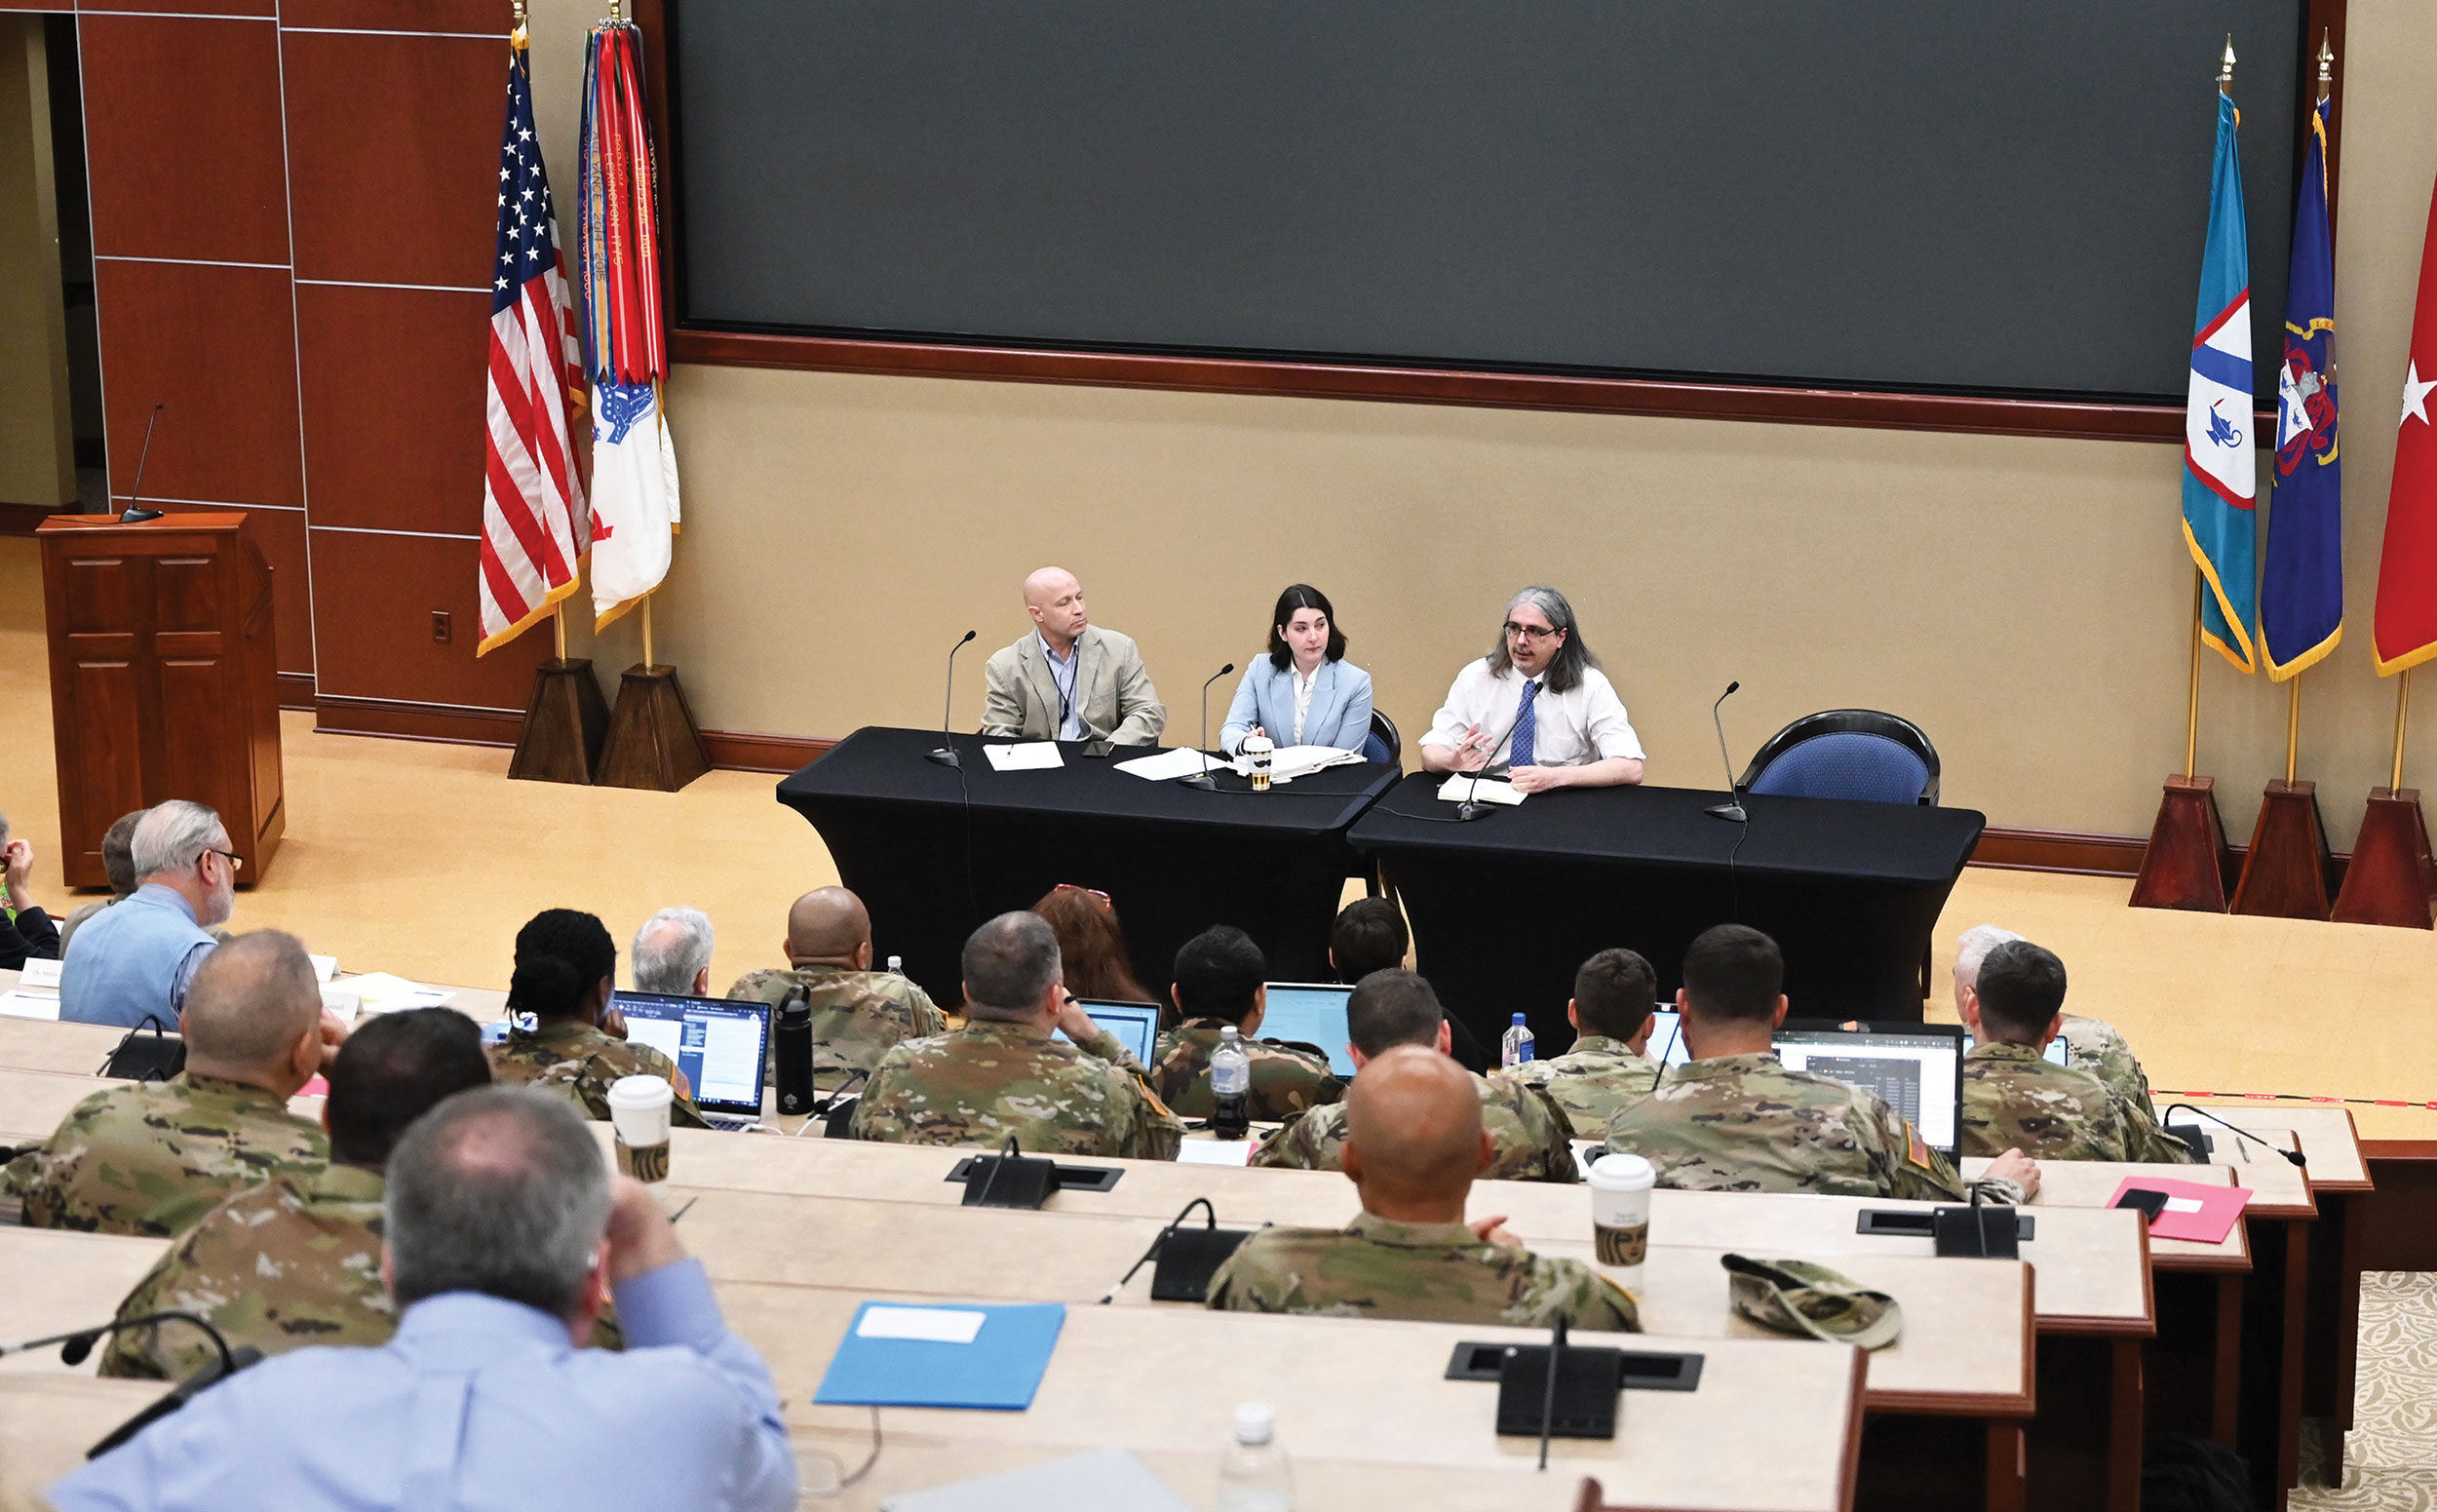 Dr. Jonathan Flint, right, research associate with the Inamori International Center for Ethics and Excellence, right, provides comments during the first panel of the 2023 CGSC Military Ethics Symposium on April 20, 2023 in the Marshall Auditorium of the Lewis and Clark Center on Fort Leavenworth. Flint presented along with Ms. Kate Kilgore, center, an intelligence analyst in the U.S. Army Training and Doctrine Command (TRADOC) G-2 (Intelligence), and Dr. Chris Marsh, left, associate professor at the Joint Special Operations Master of Arts (JSOMA) program at Fort Bragg, a division of the College of International Security Affairs of the National Defense University.